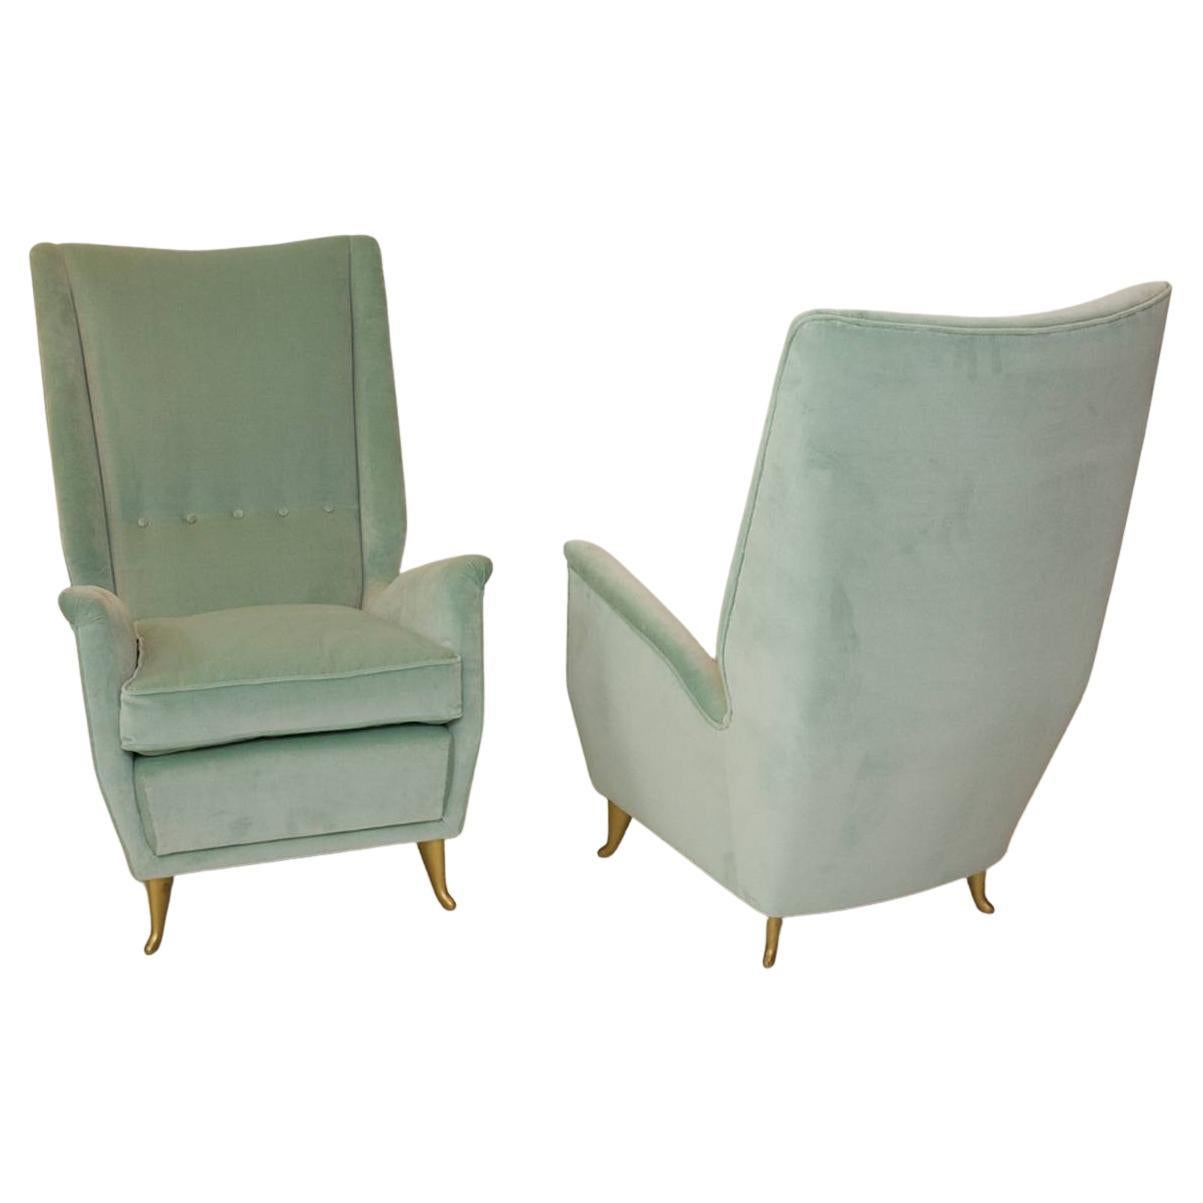 Pair of Mid-Century Modern Armchairs by ISA from a Design by Gio Ponti For Sale